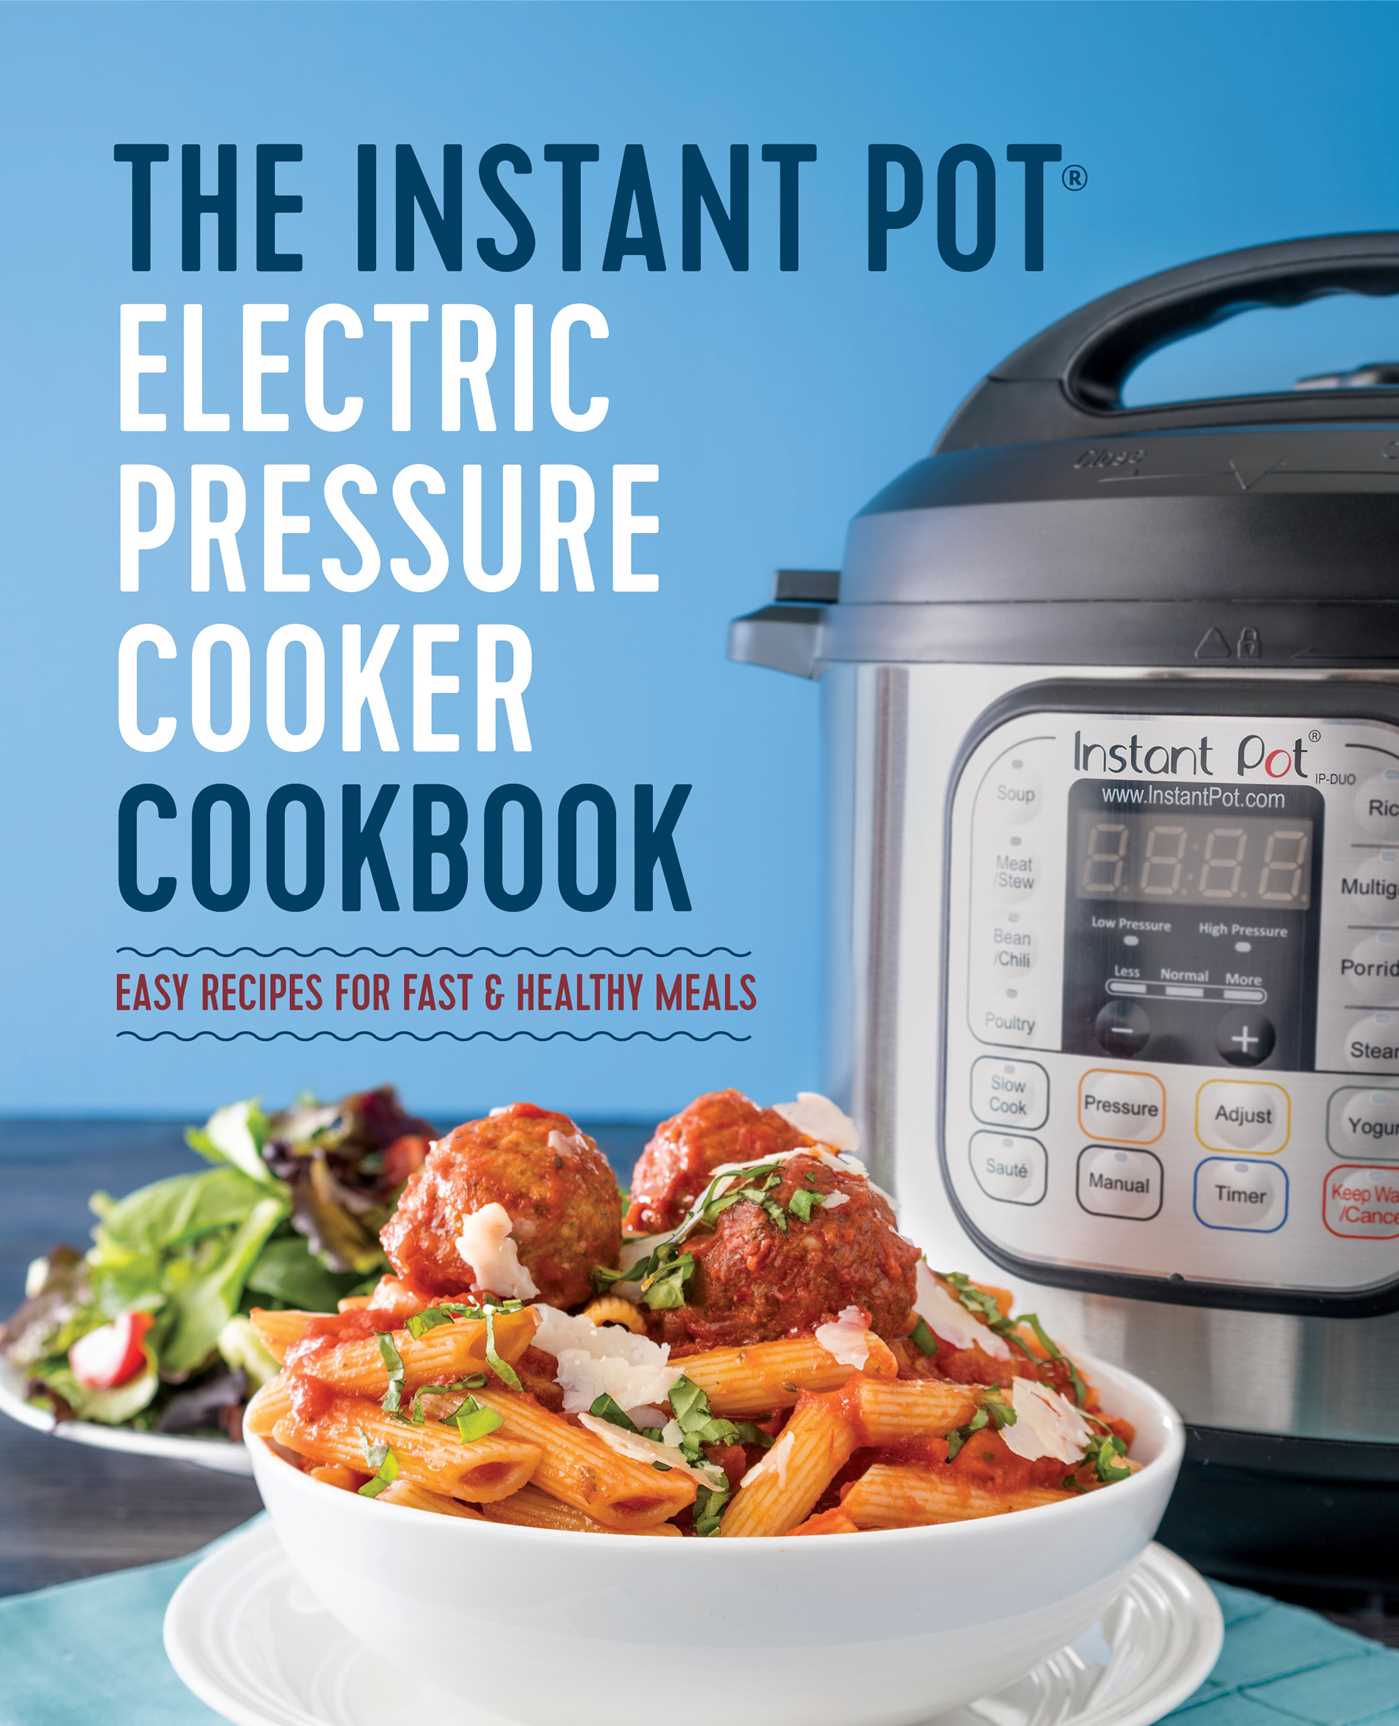 The Instant Pot Electric Pressure Cooker Cookbook: Easy Recipes for Fast & Healthy Meals - image 1 of 1